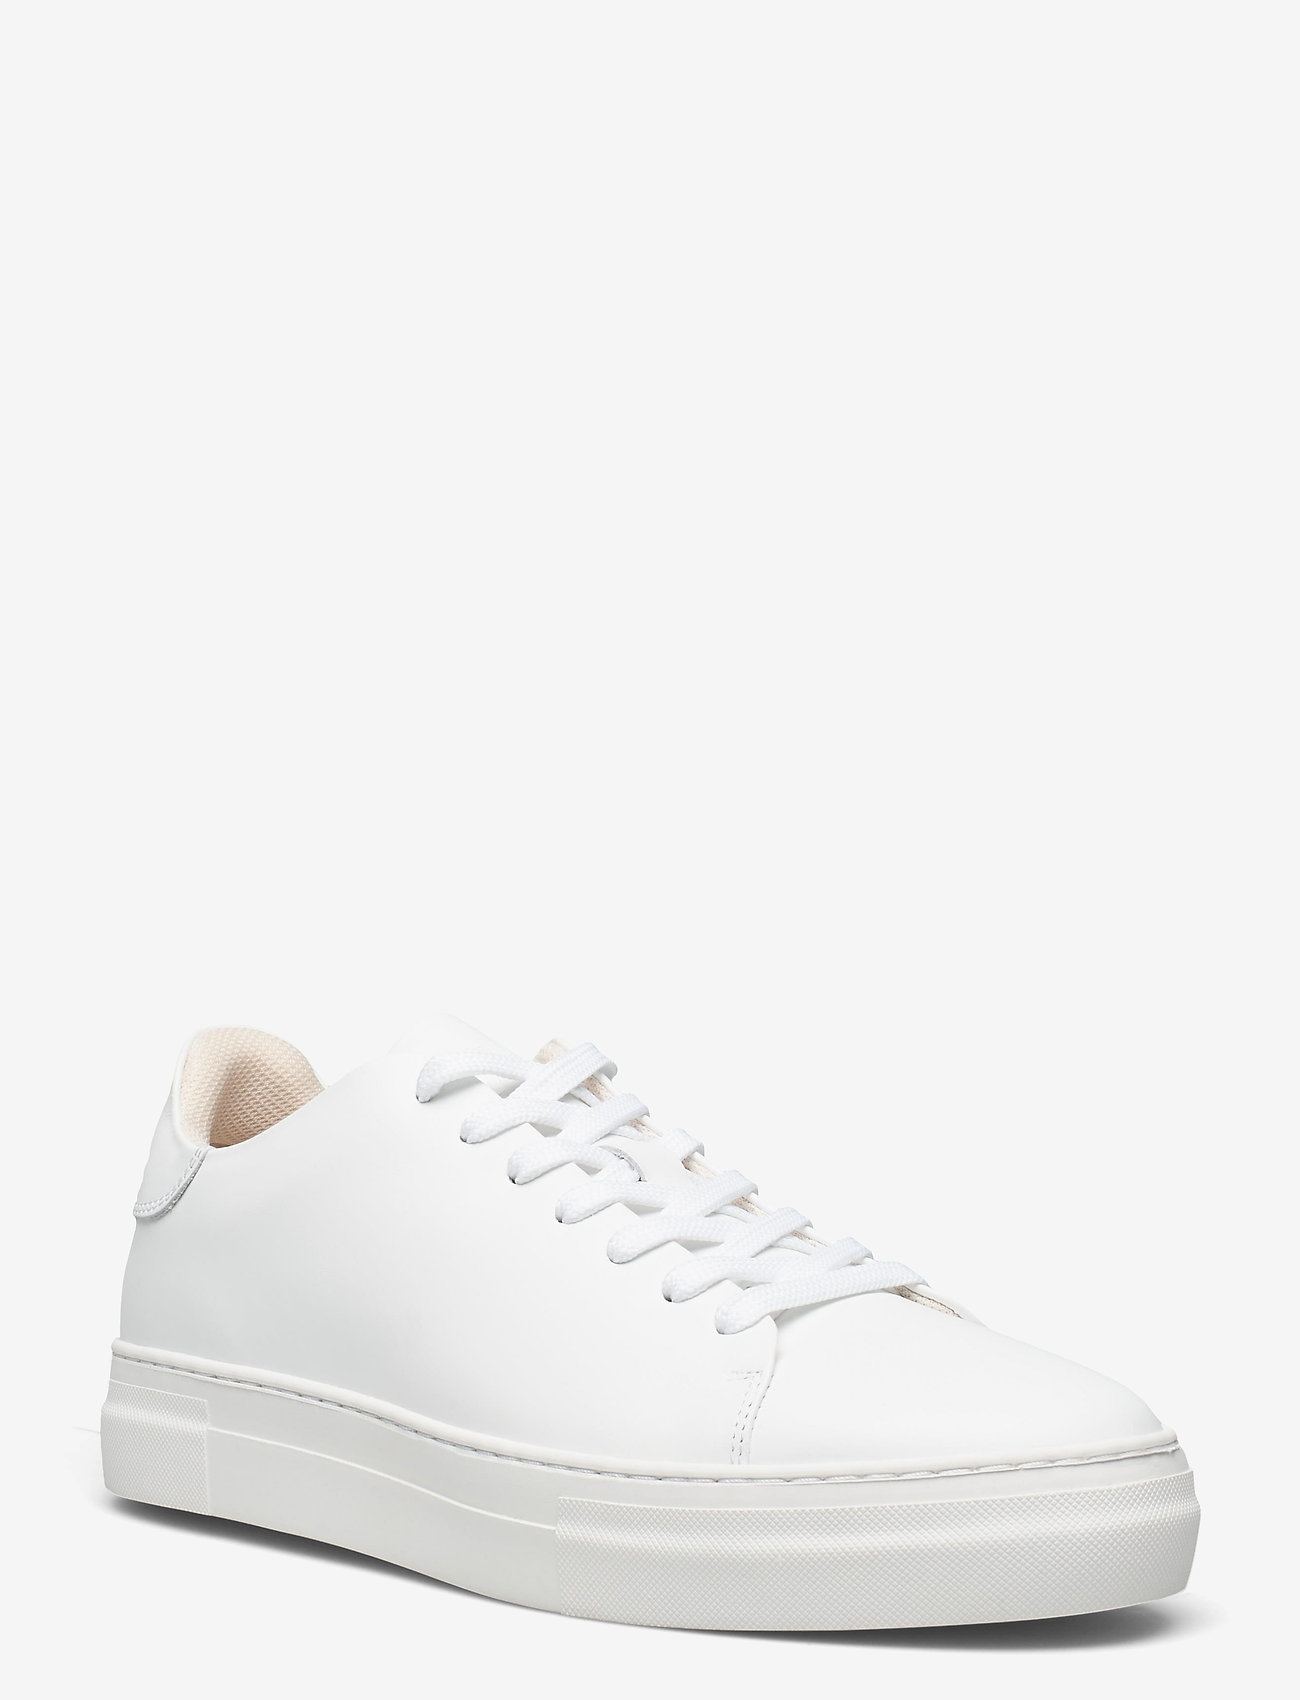 Selected Homme - SLHDAVID CHUNKY LEATHER SNEAKER NOOS O - low tops - white - 0